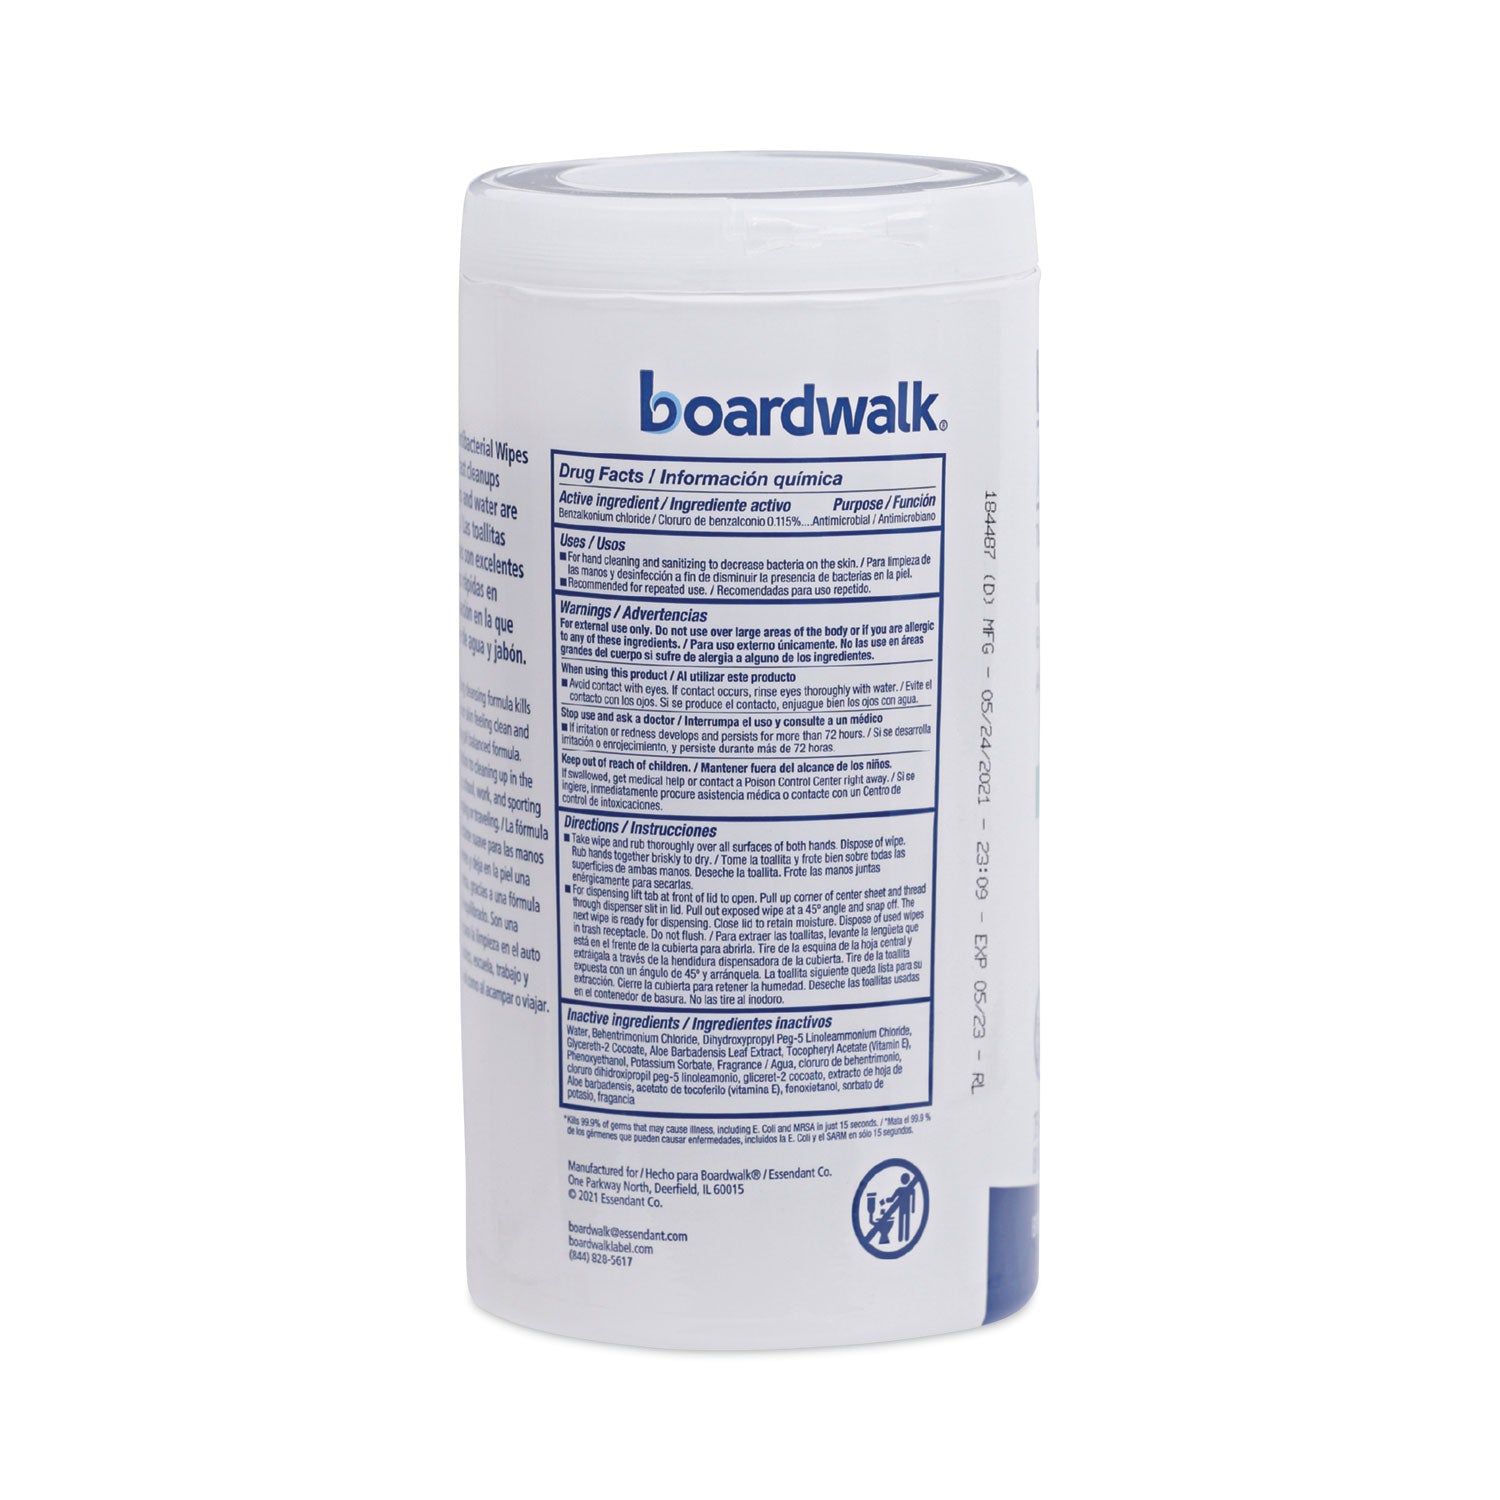 antibacterial-wipes-54-x-8-fresh-scent-75-canister-6-canisters-carton_bwk458wa - 5